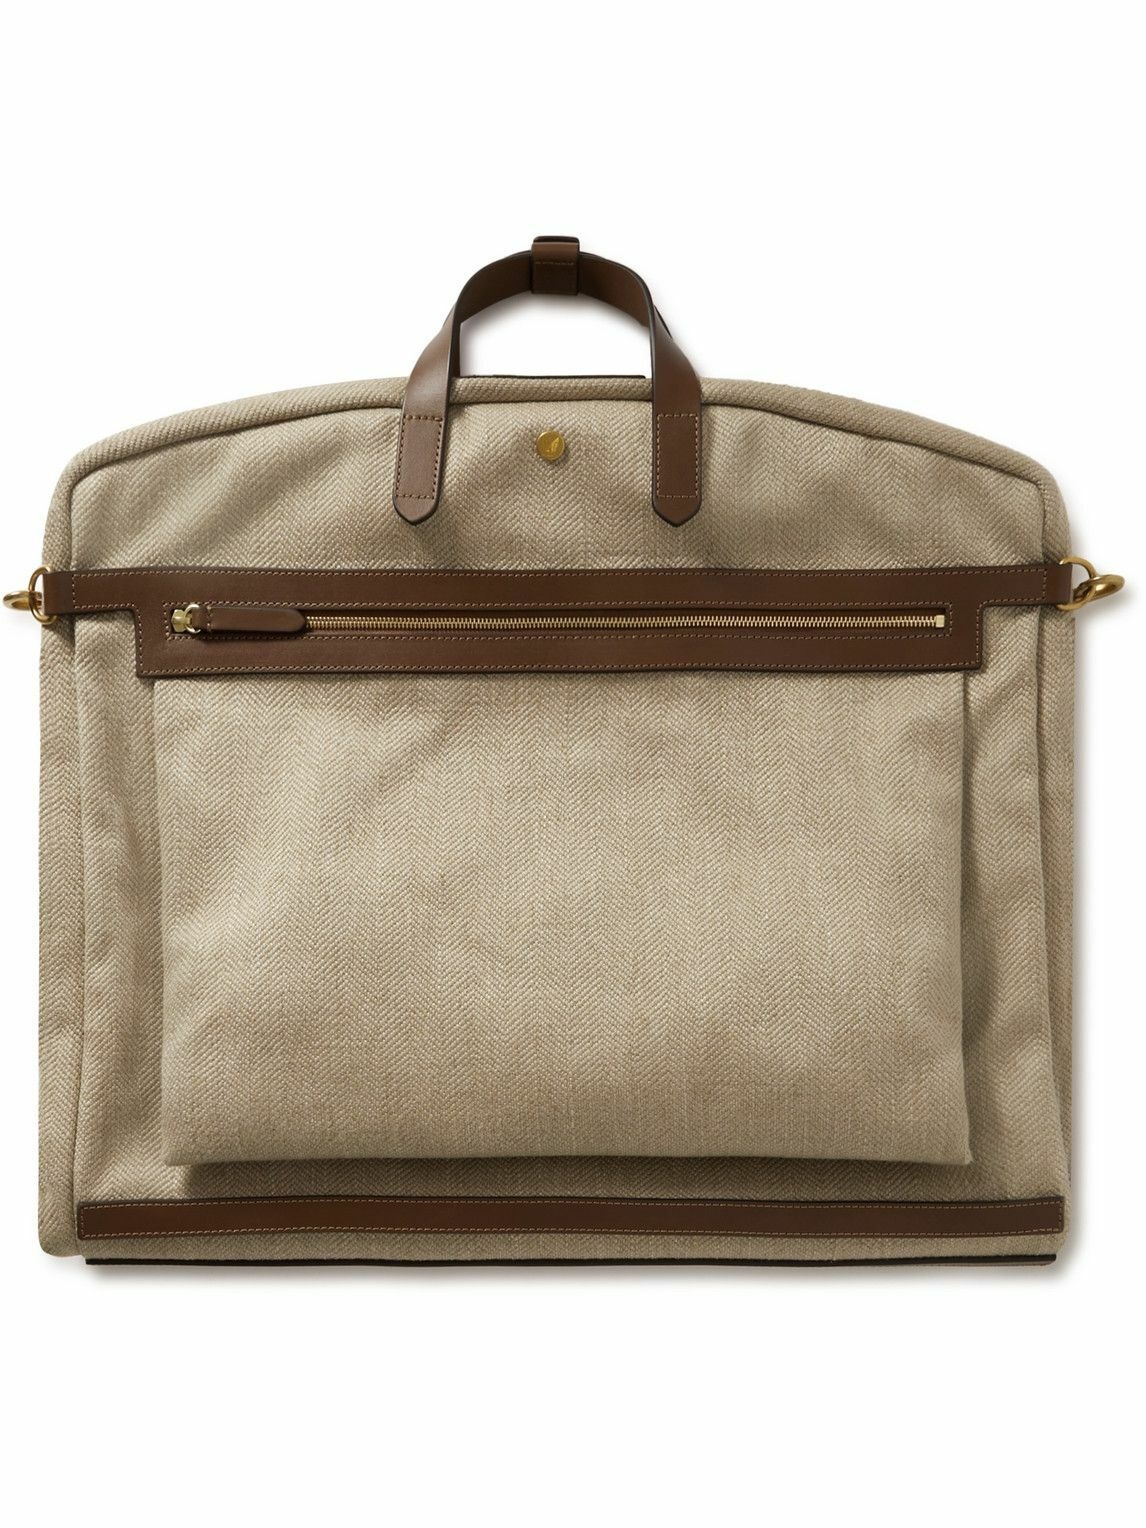 Photo: Mismo - Leather-Trimmed Herringbone Linen Suit Carrier